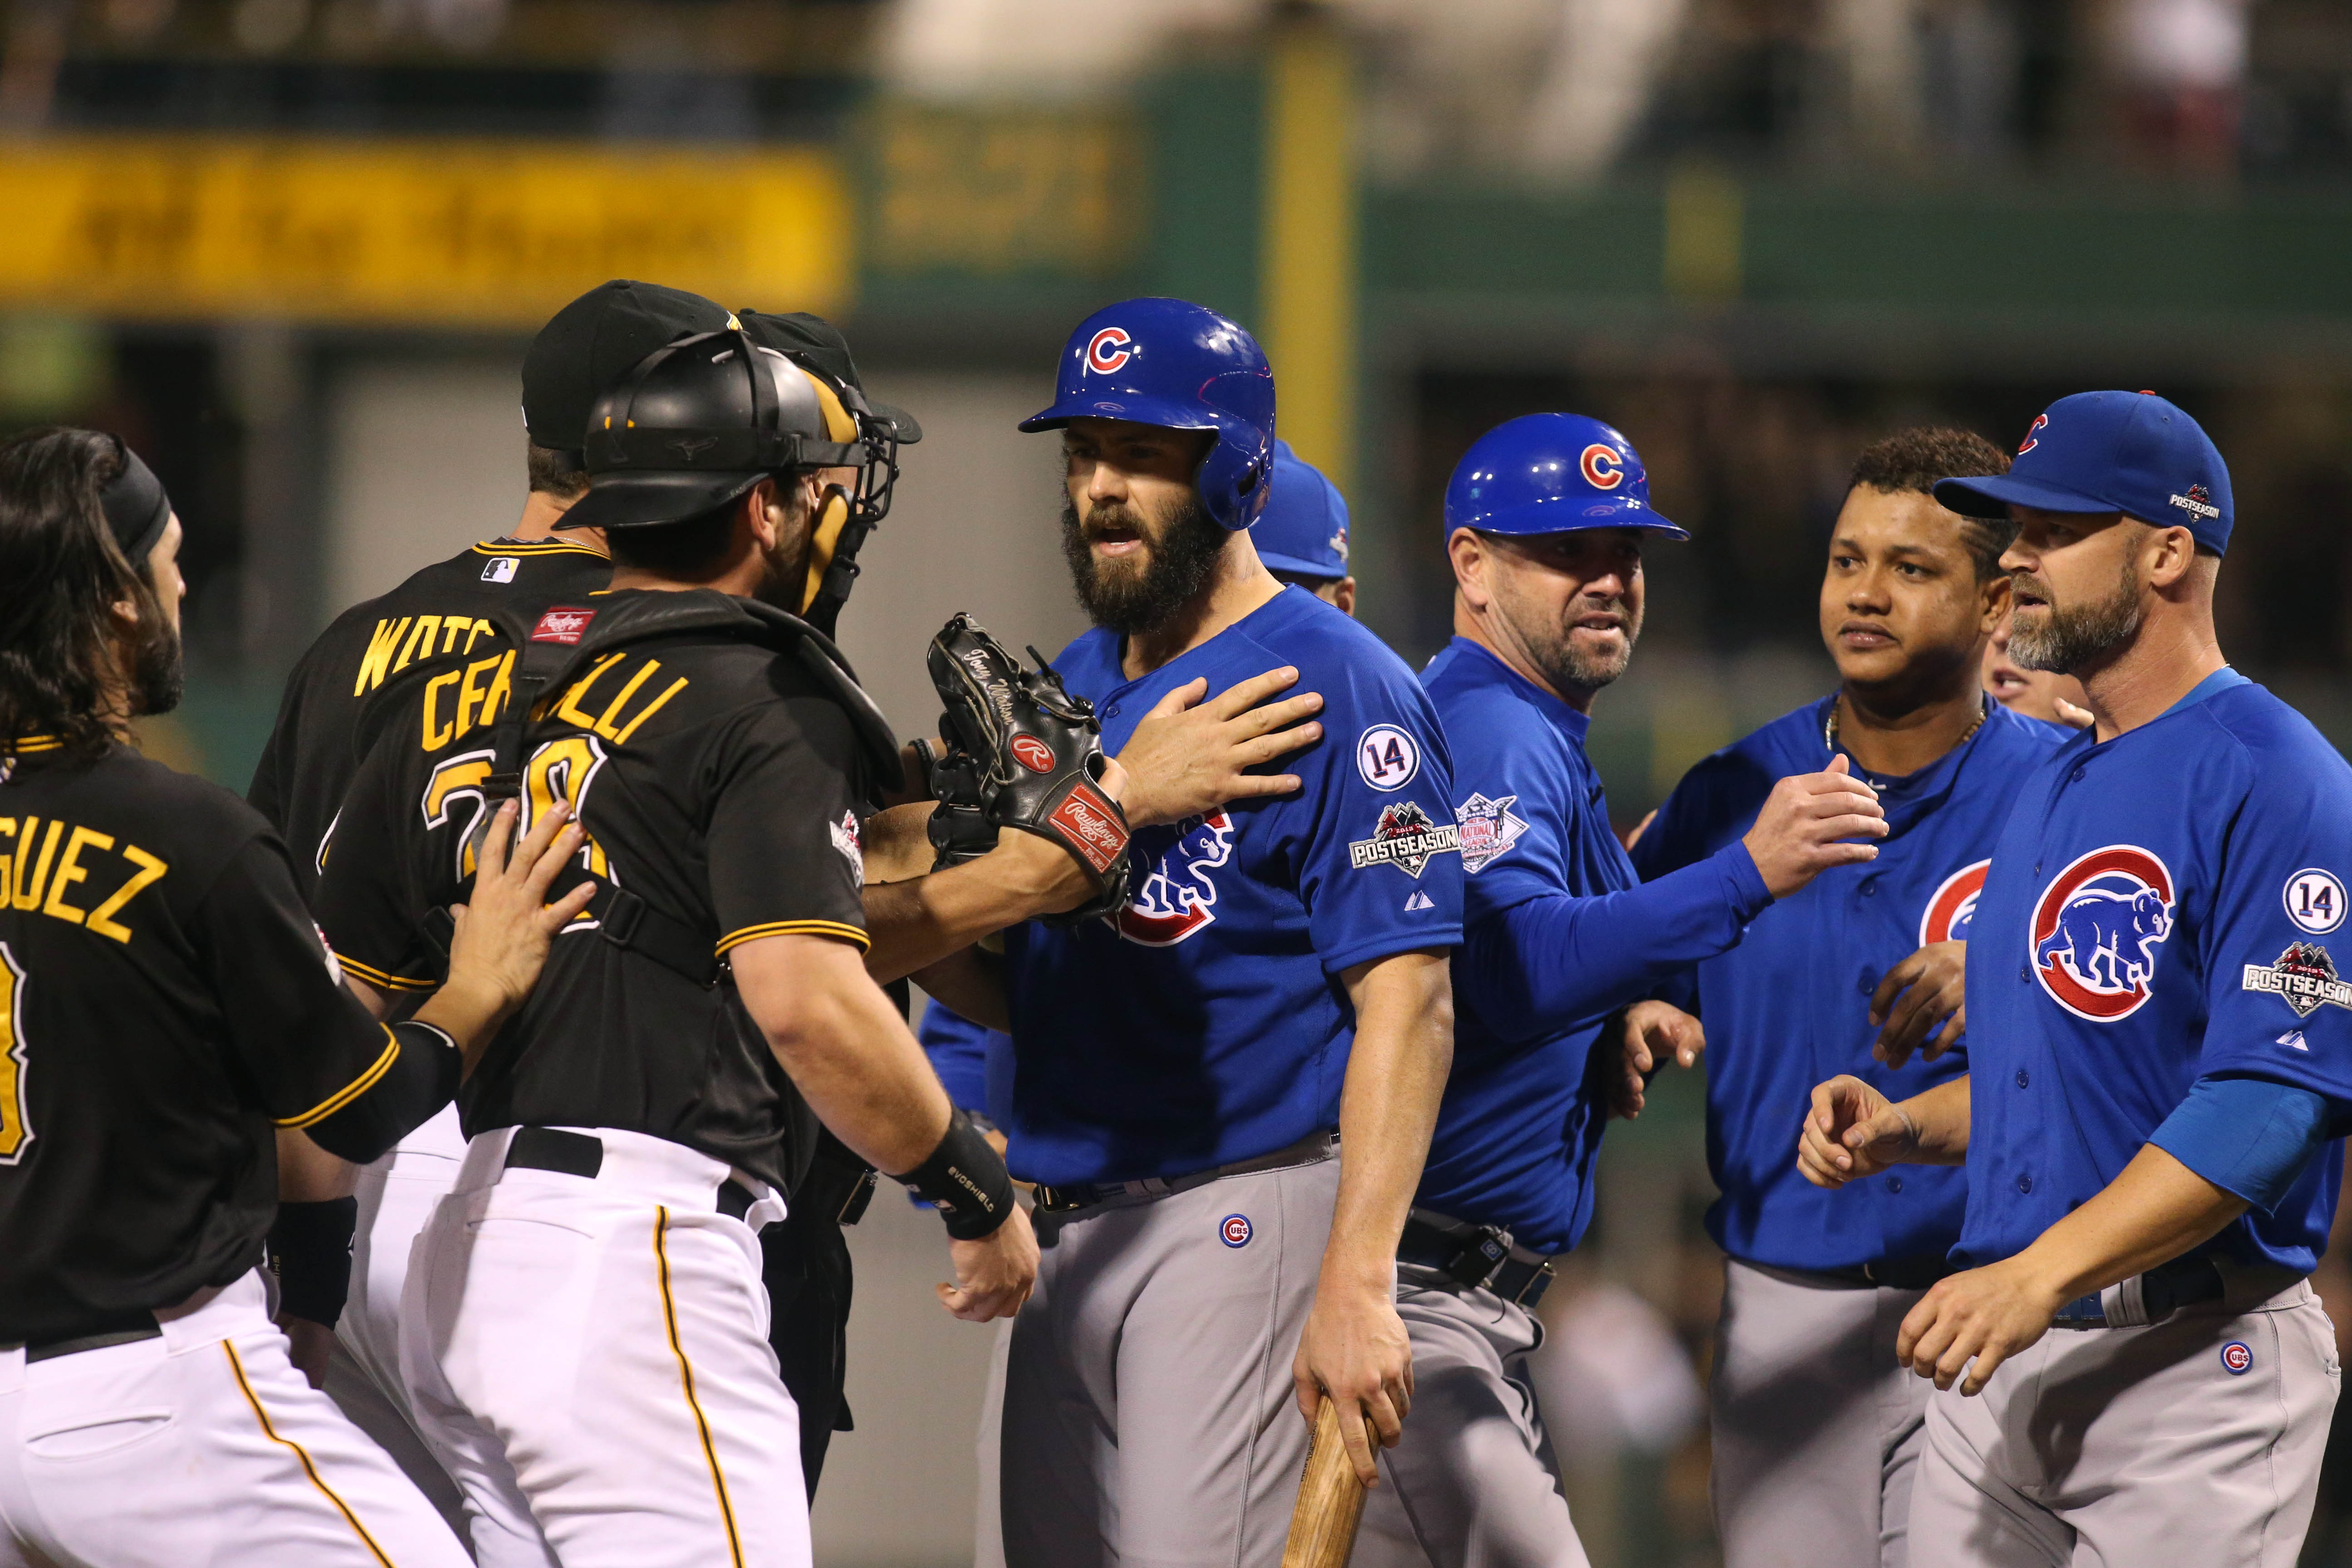 Can Jordy Mercer Help Rescue The Pirates' Offense? - Bucs Dugout